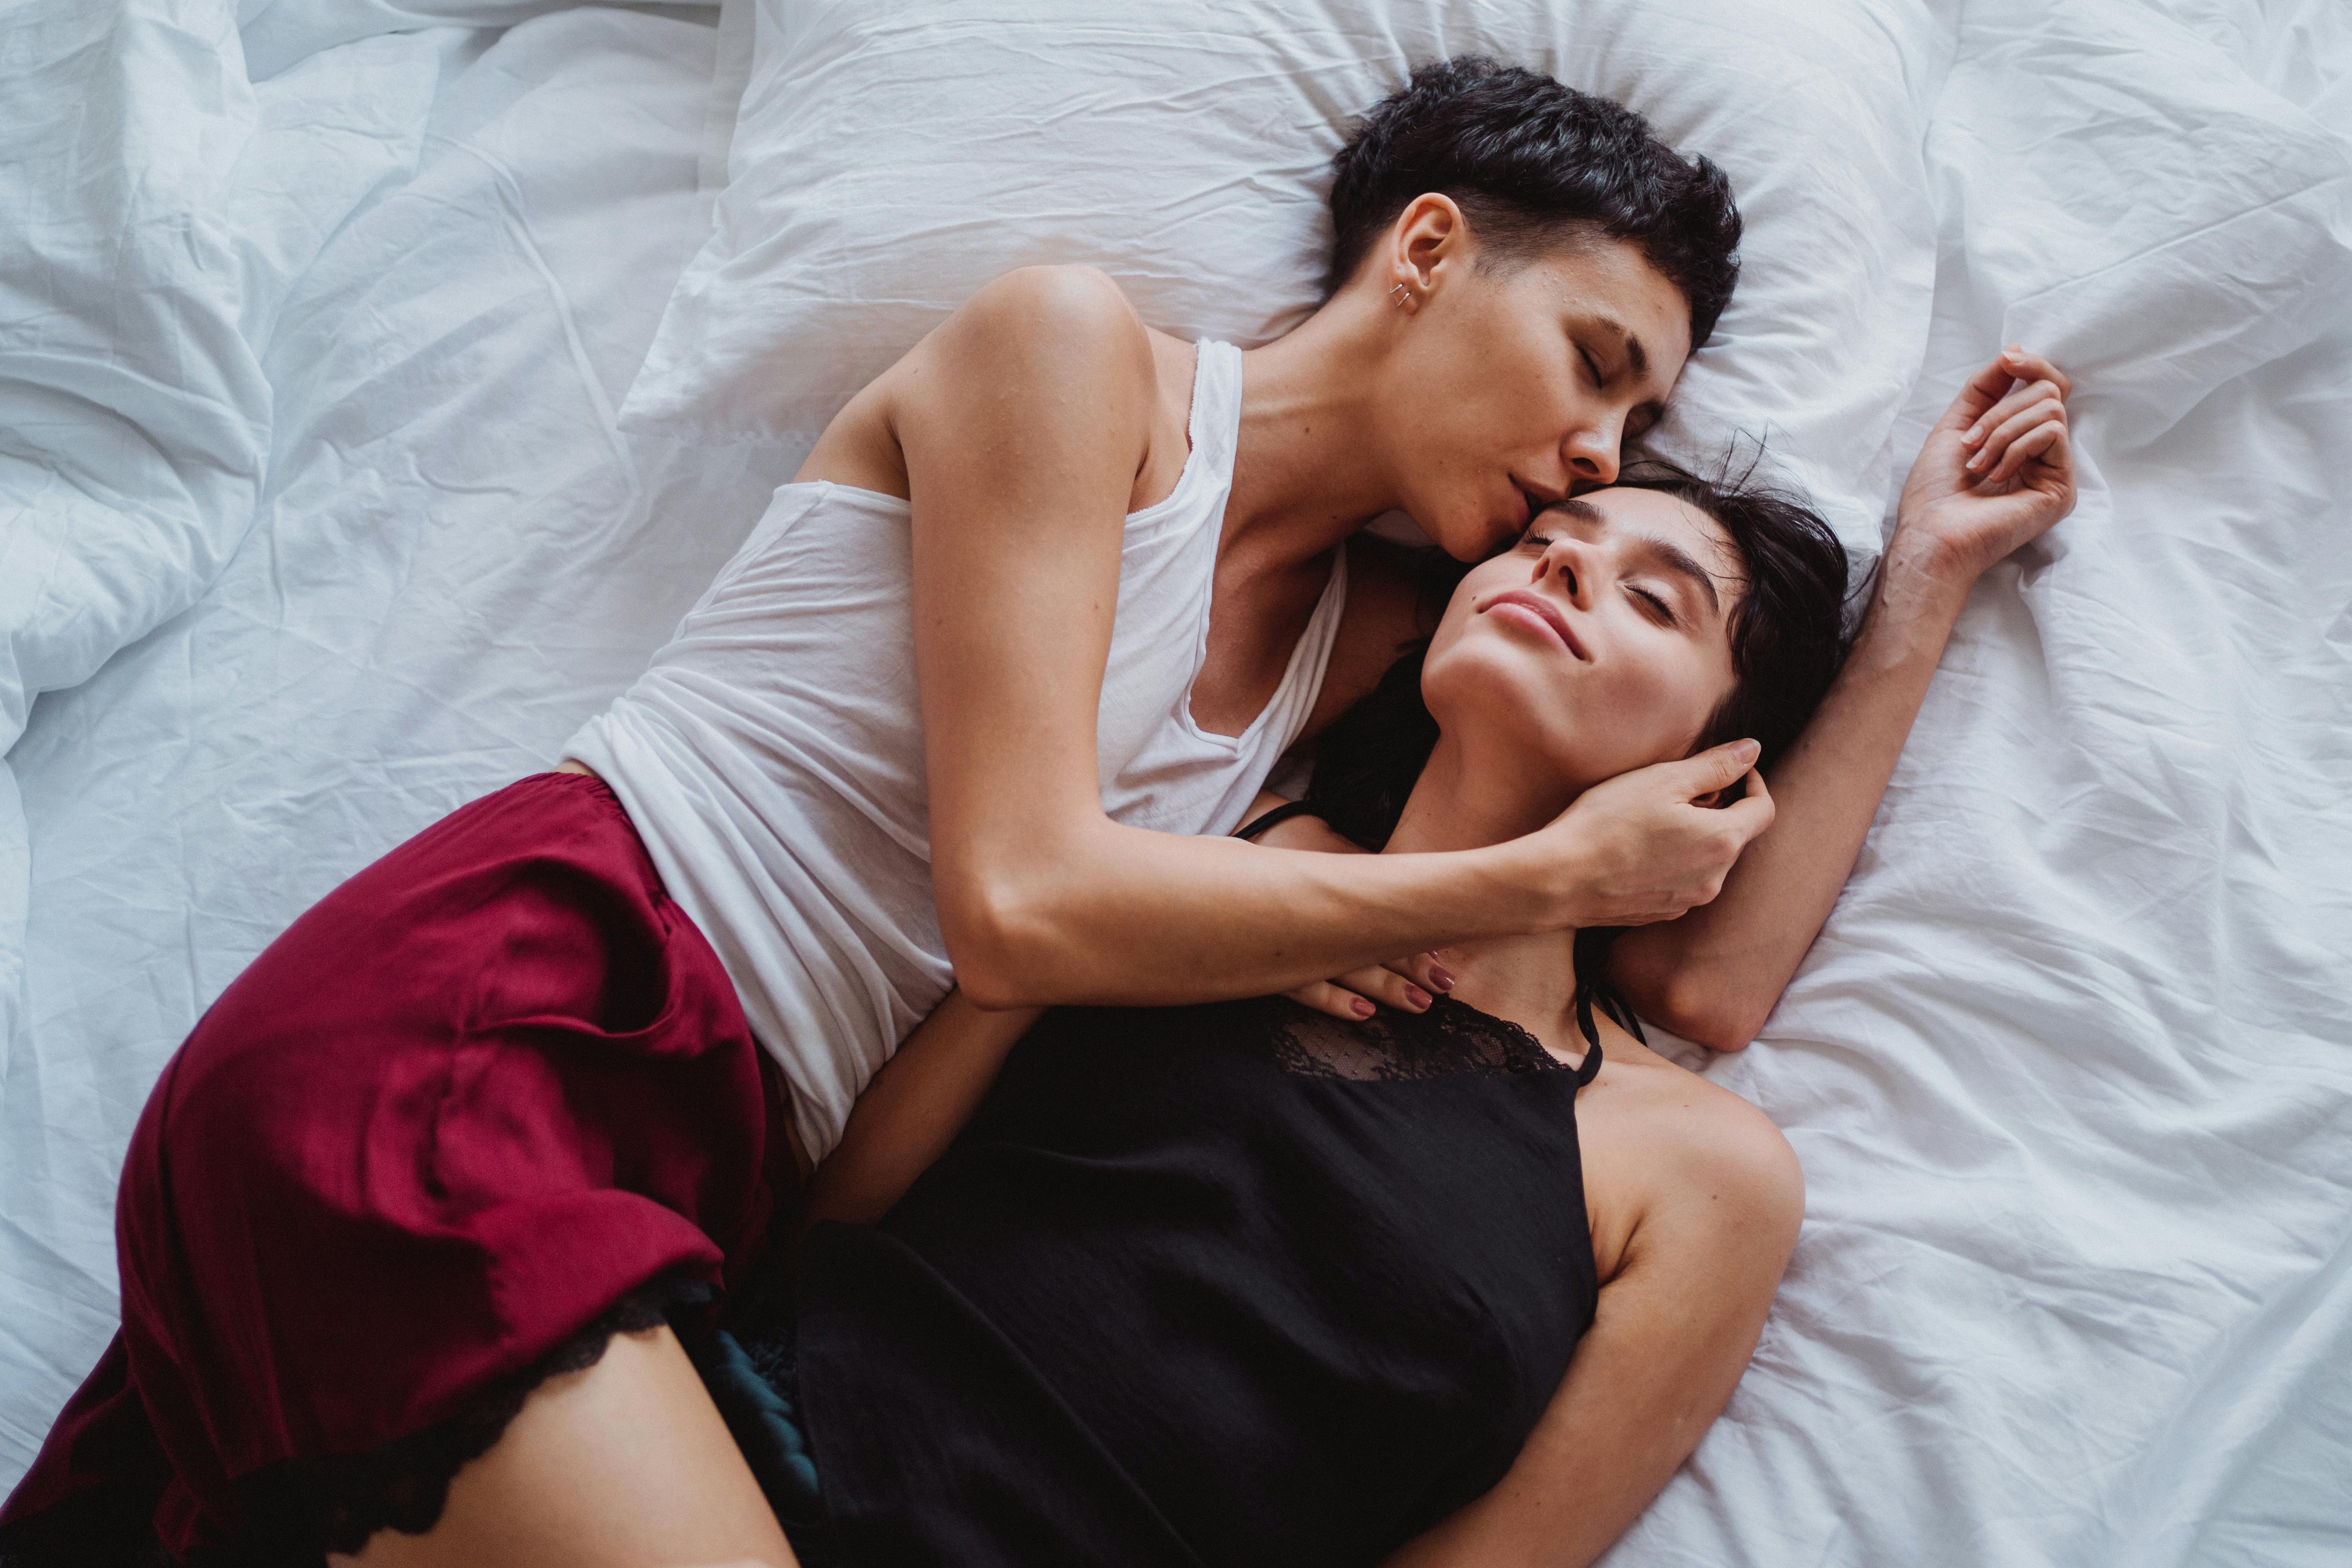 Two Women Lying in Bed · Free Stock Photo photo